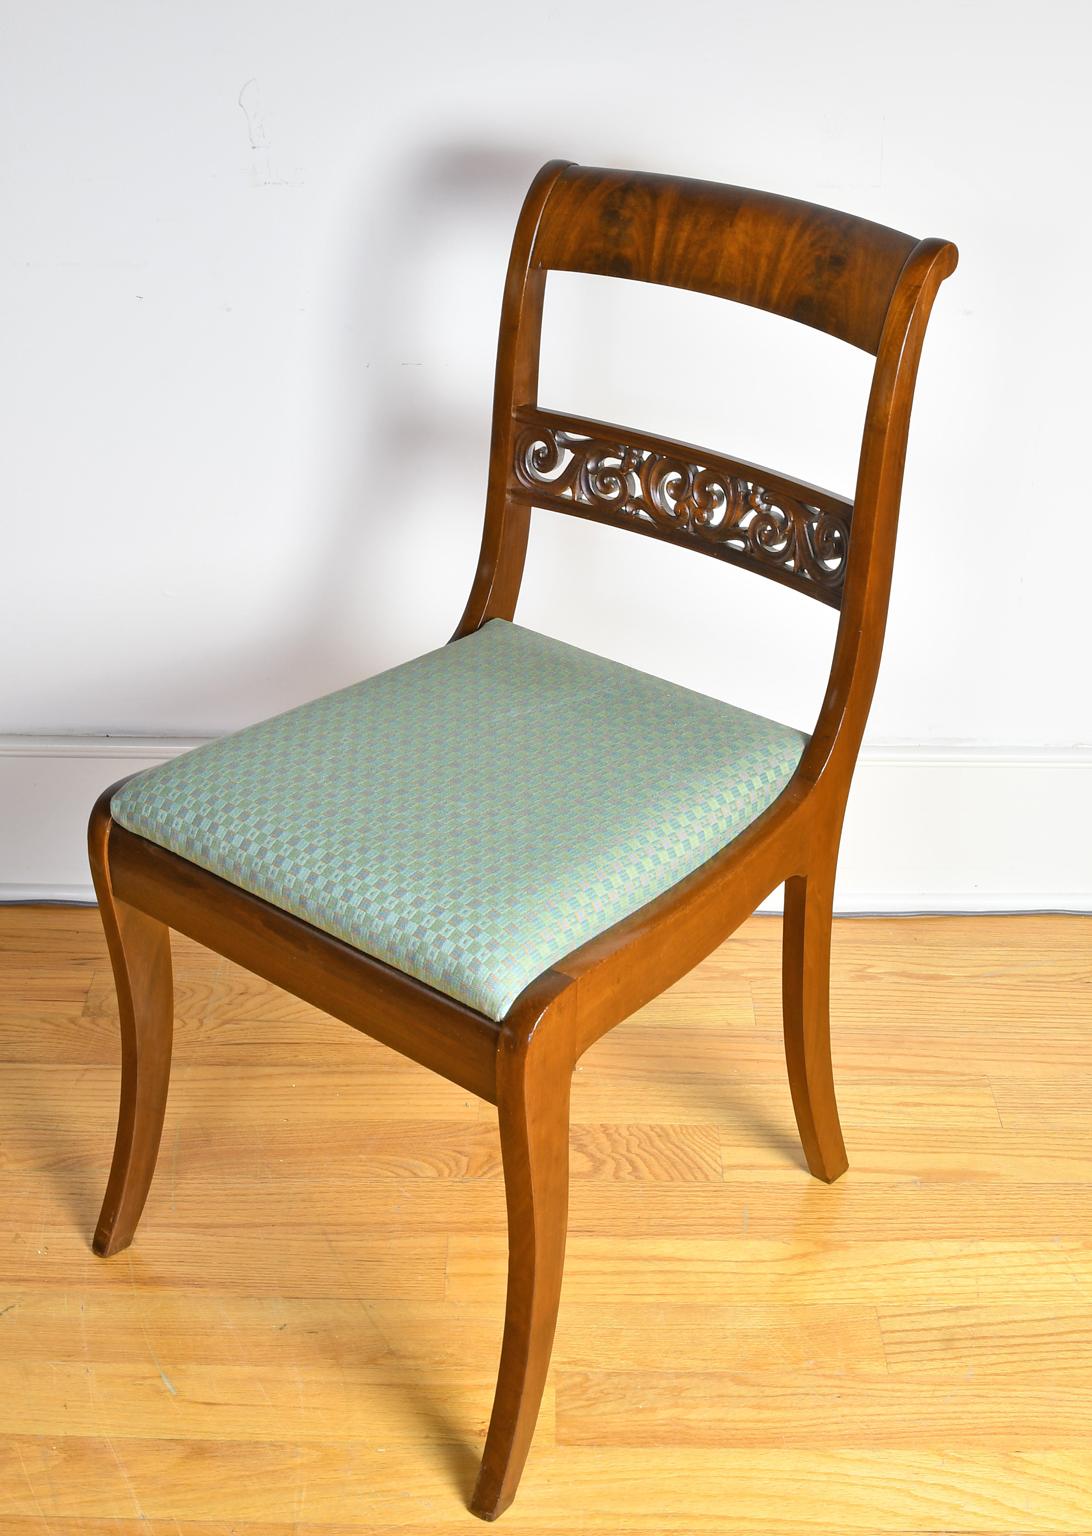 Set of 11 Antique Dining Chairs with 9 Sides & 2 Arms in West Indies Mahogany For Sale 6